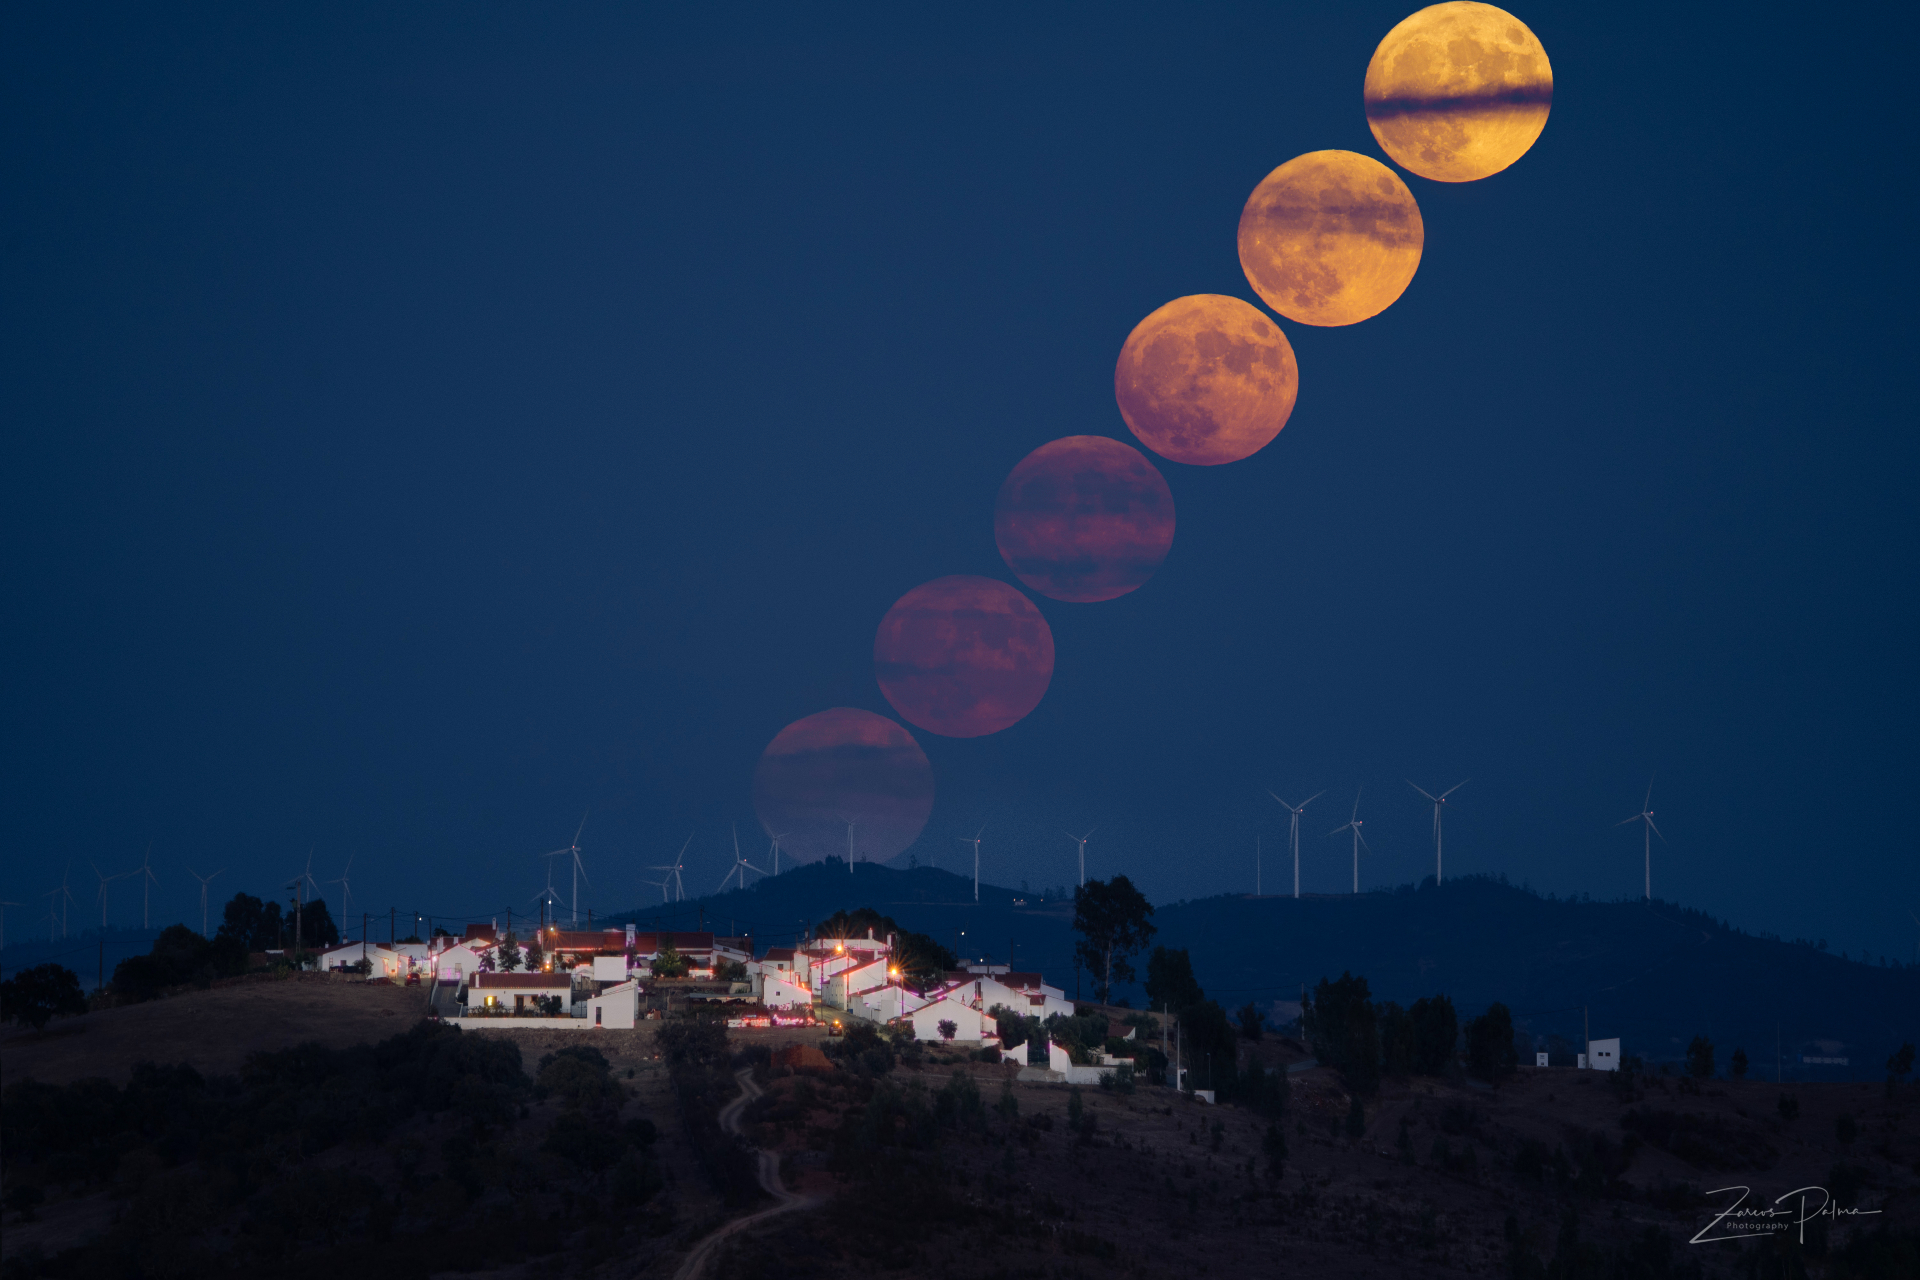 super blue moon appears to rise up behind wind turbines with a small village in the foreground.